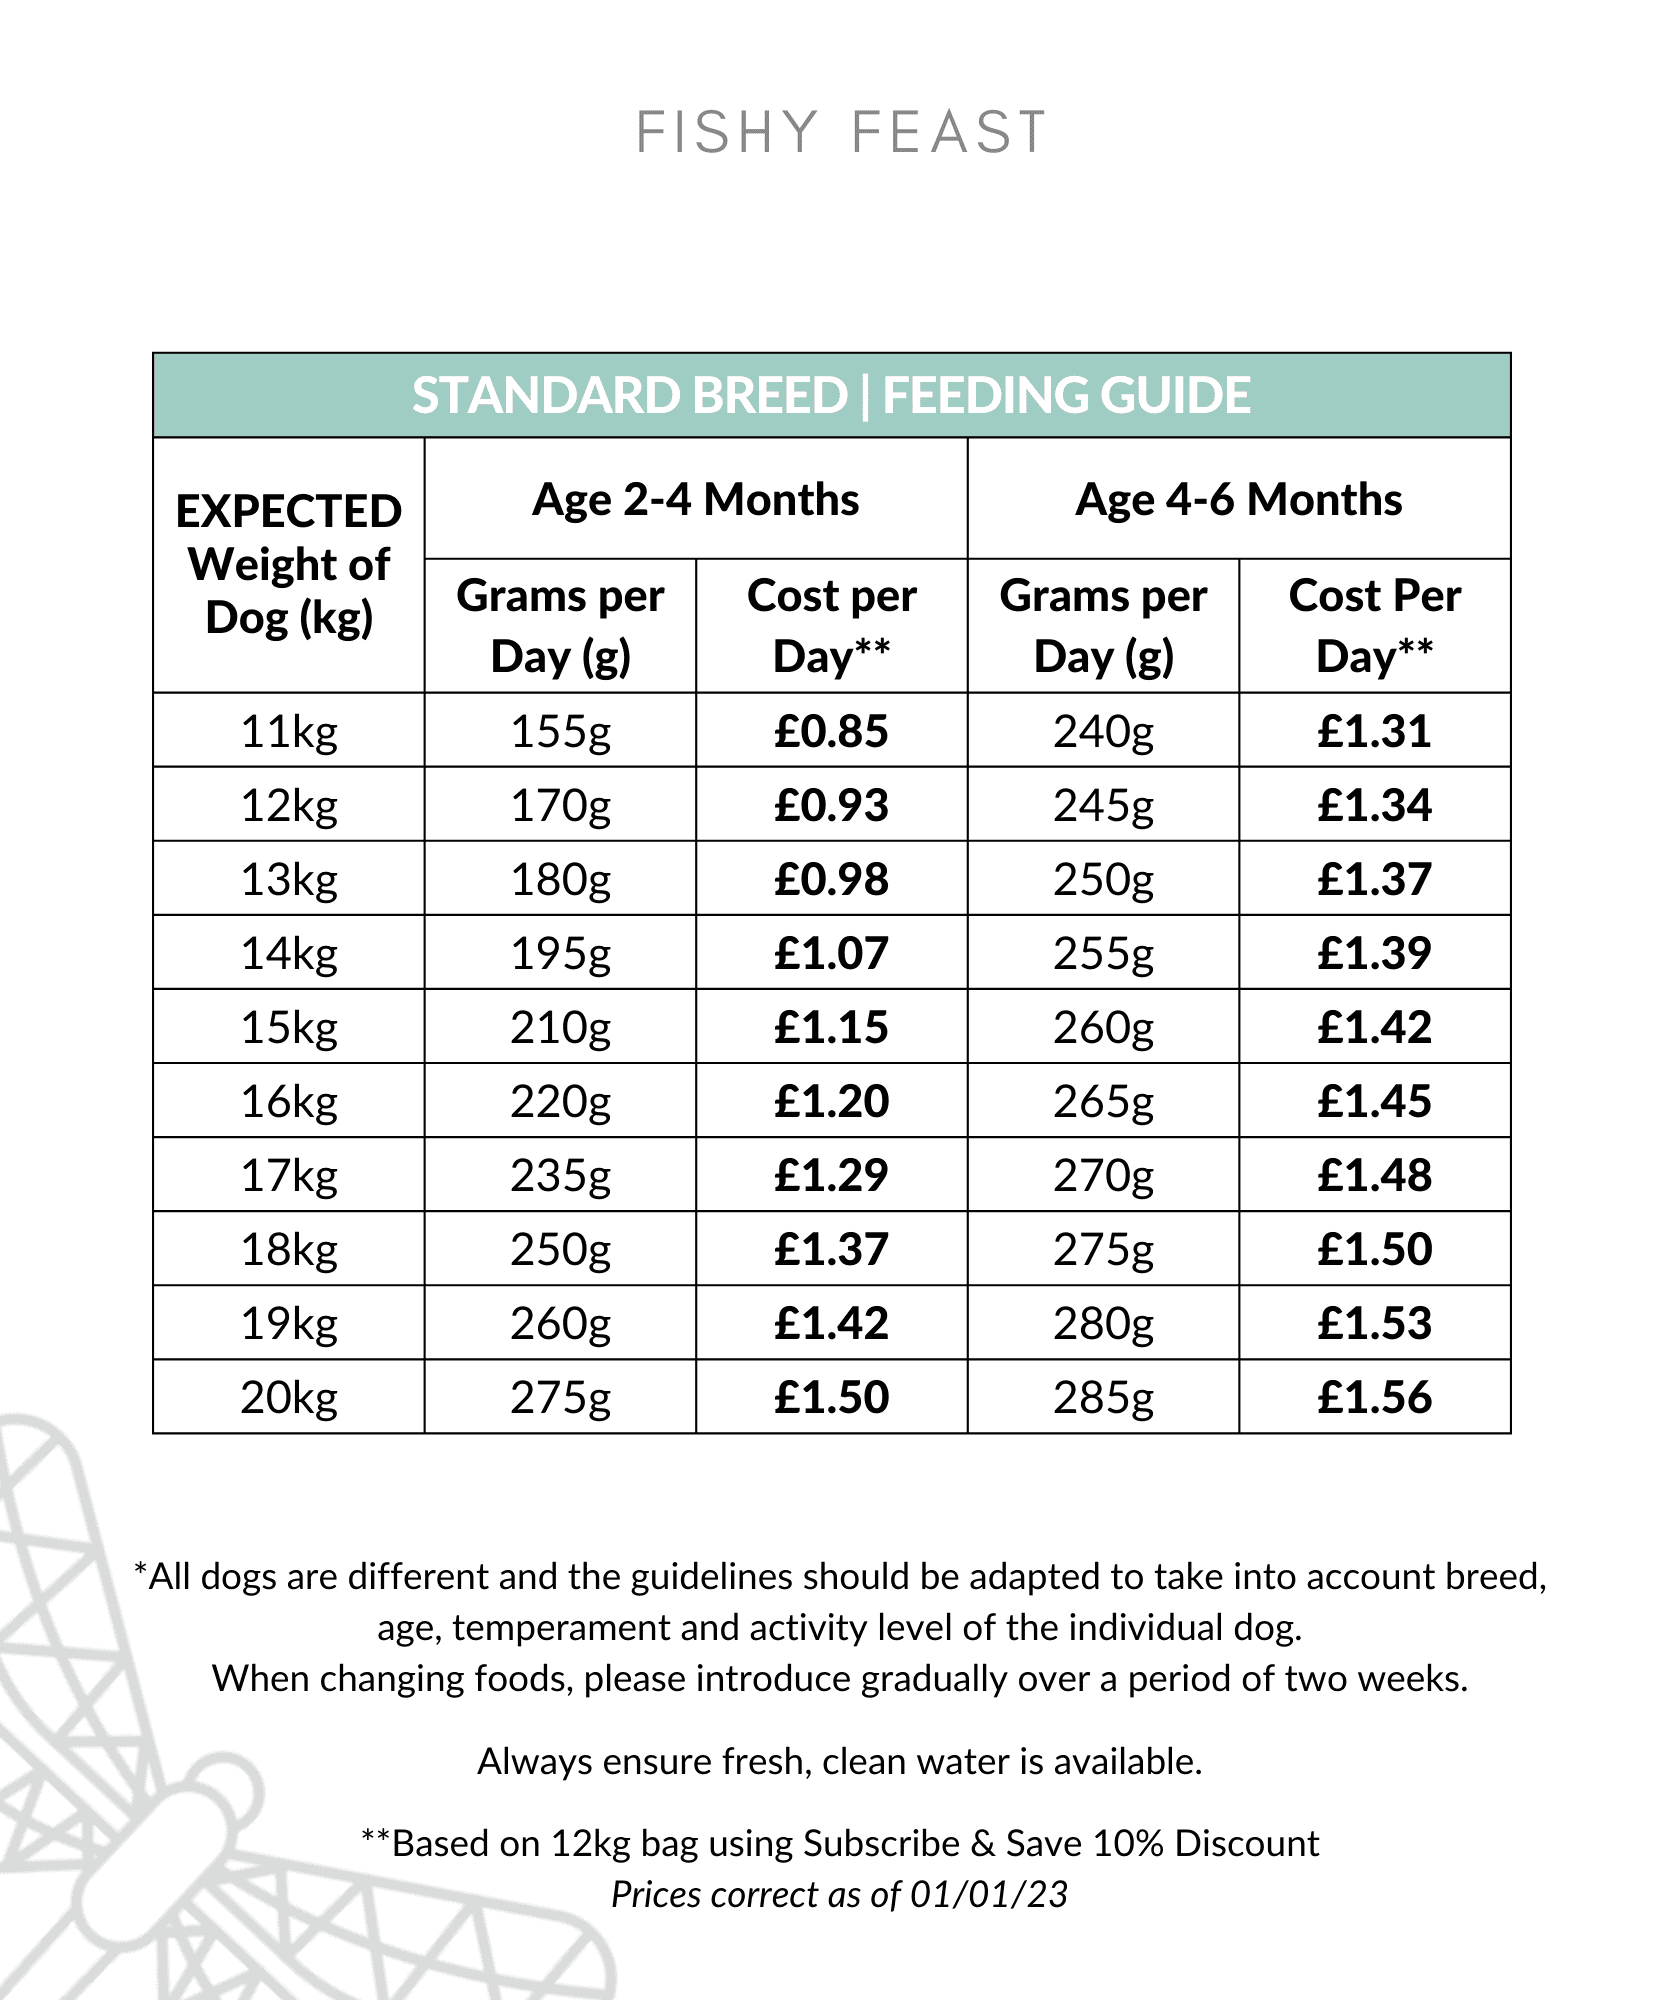 Fishy Feast feeding guide 11-20kg up to 6 months